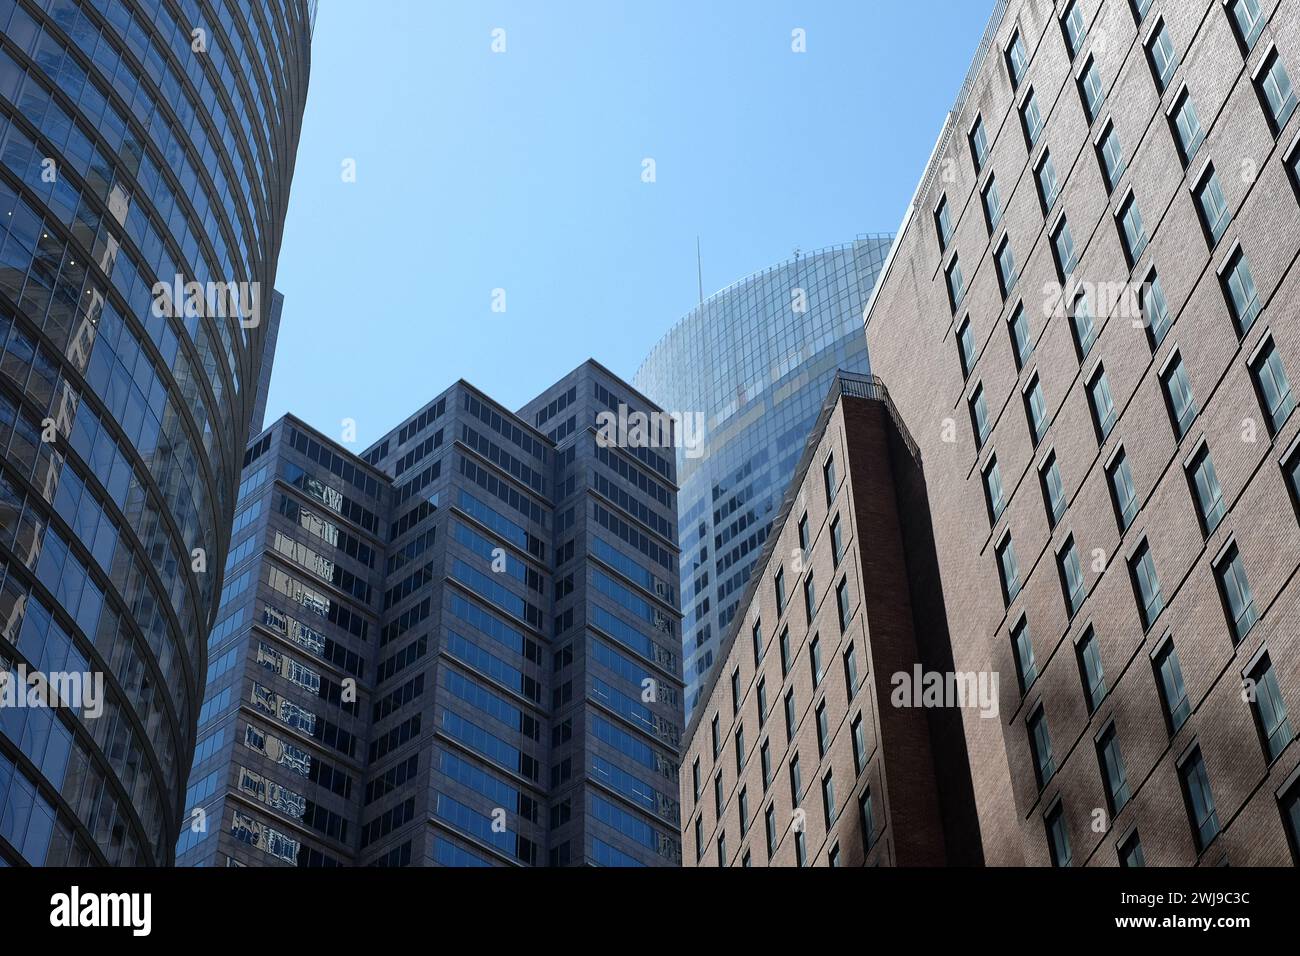 Geometric shapes & classic curves, 50 years of Architecture 4 landmark buildings w/ Aurora Place by Renzo Piano looking up at the Sydney Skyline Stock Photo